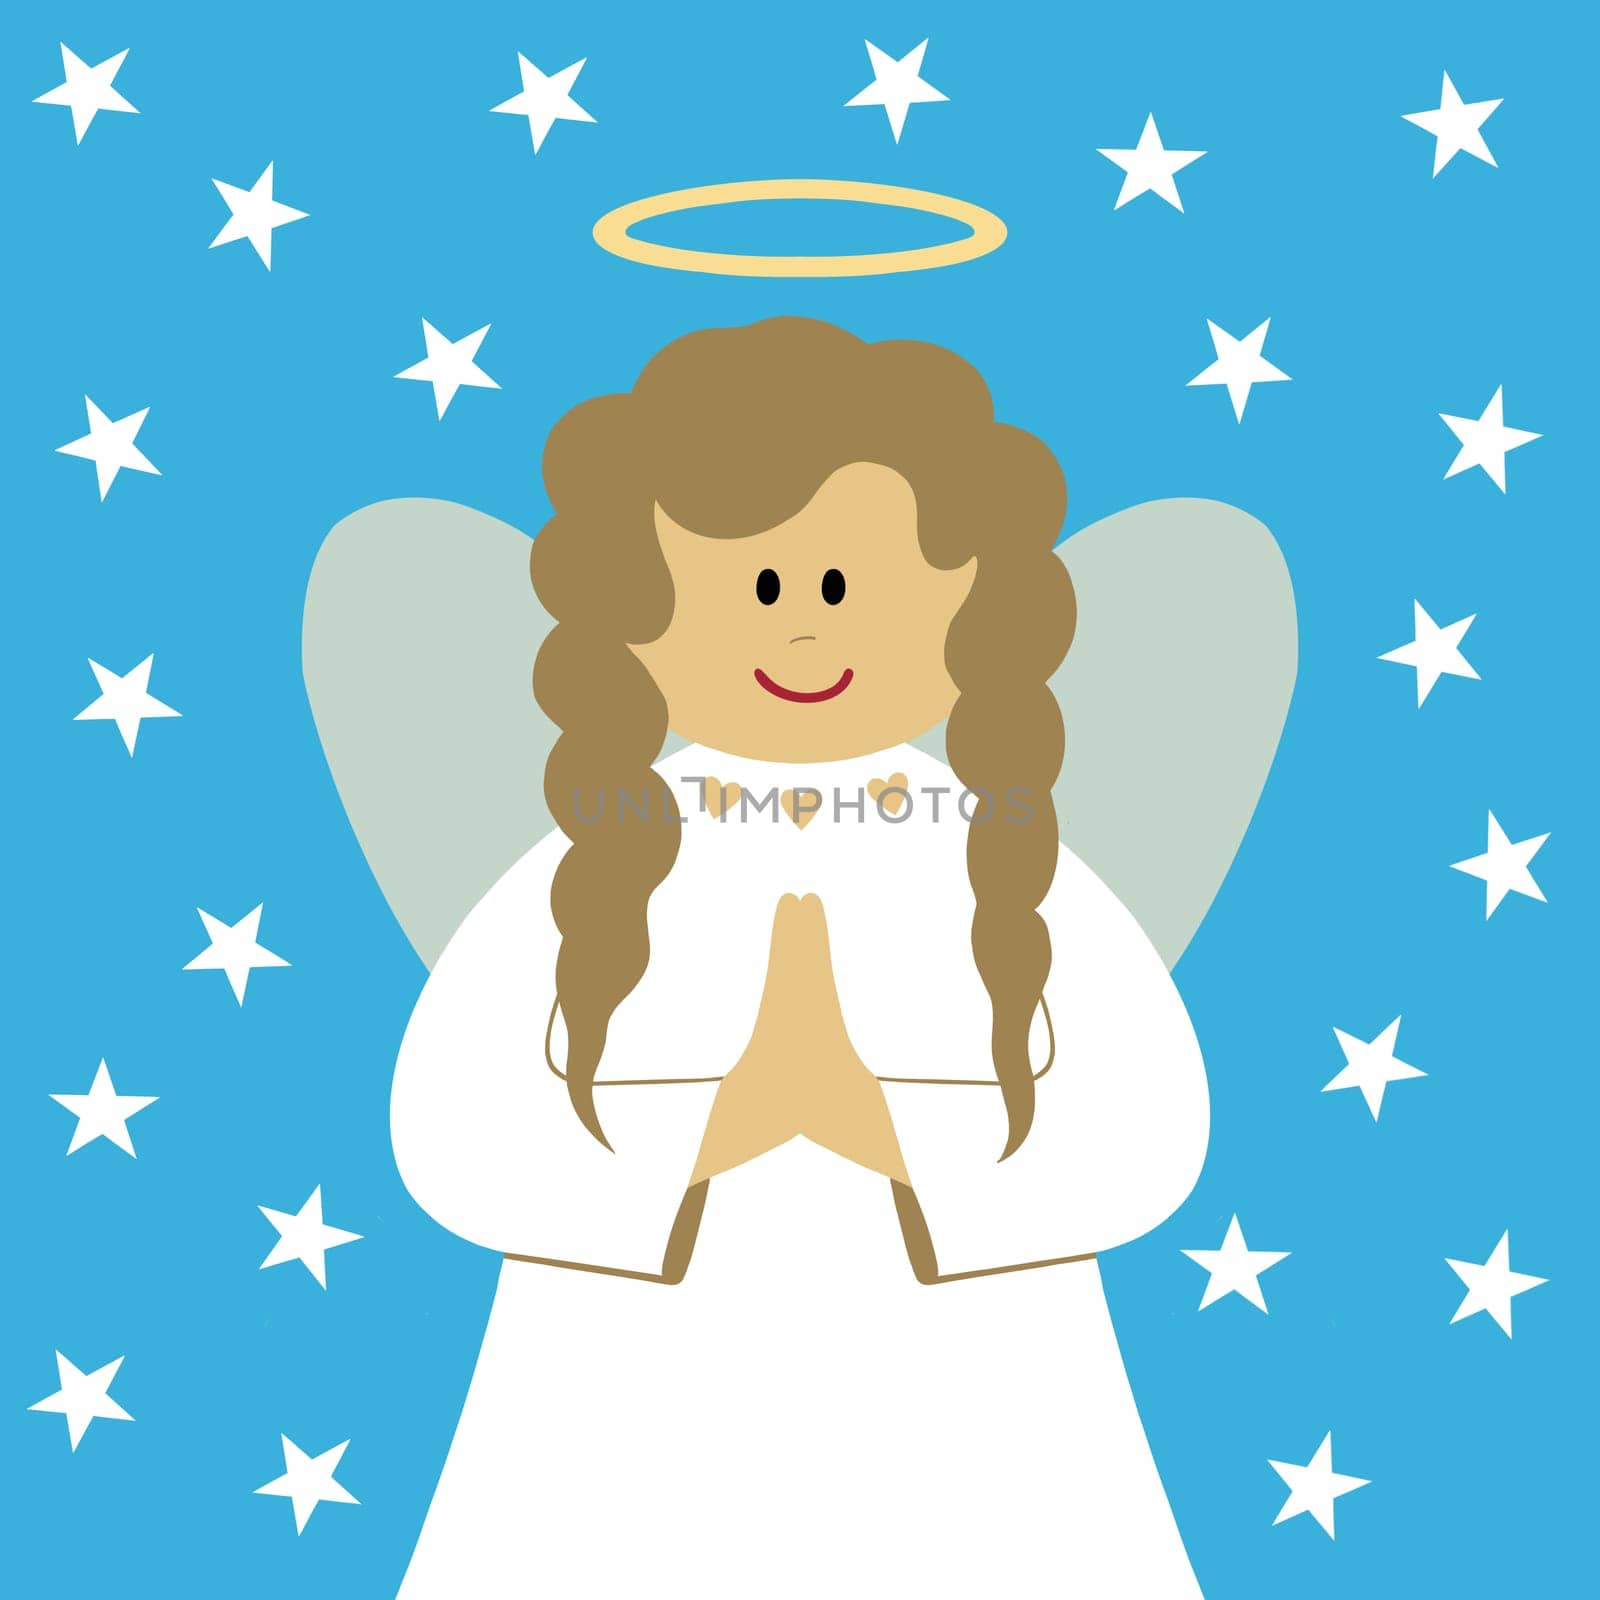 Modern quirky Christmas angel illustration on a teal background. The angel has a smiley face and wavy hair. She is in a praying pose and has a halo above her. The angel is surrounded by twinkling white stars. Christmas card. Christmas fun. Happy holidays.